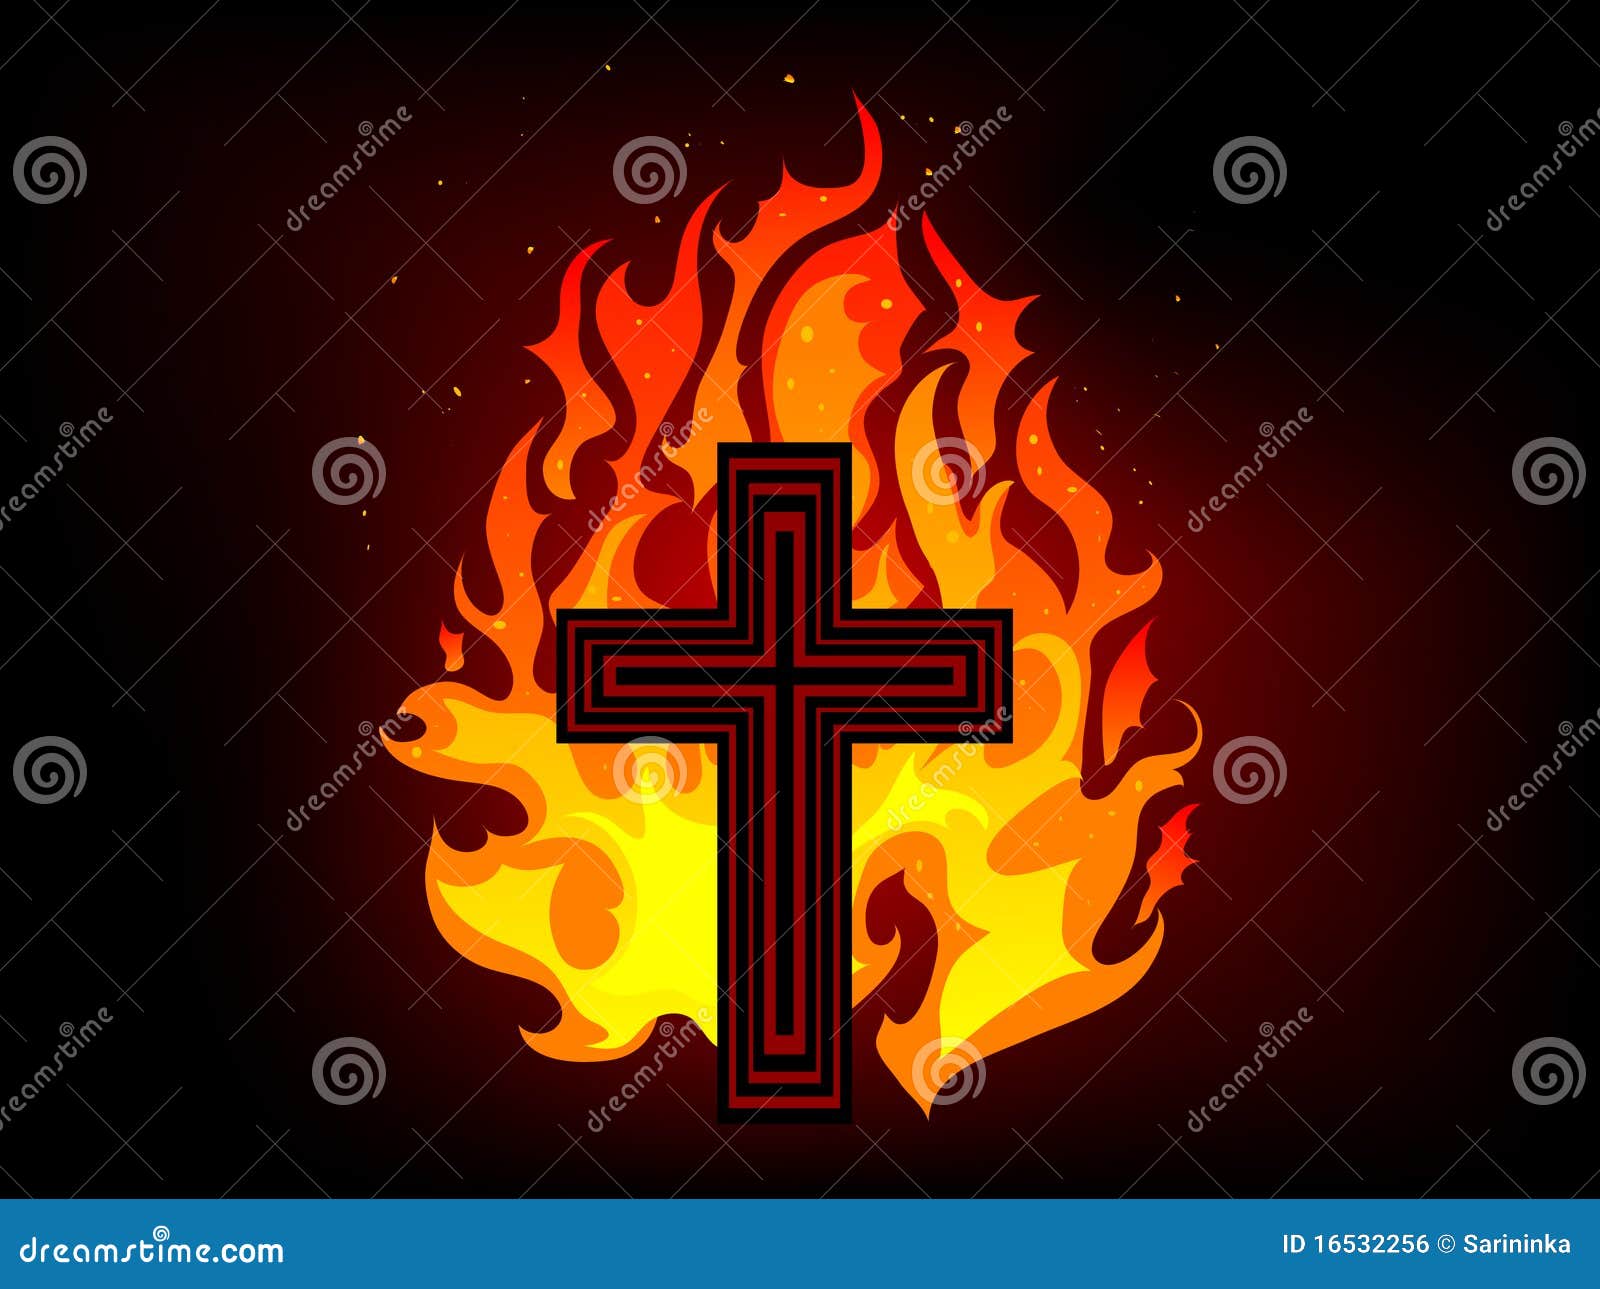 Cross In Fire Royalty Free Stock Image - Image: 16532256